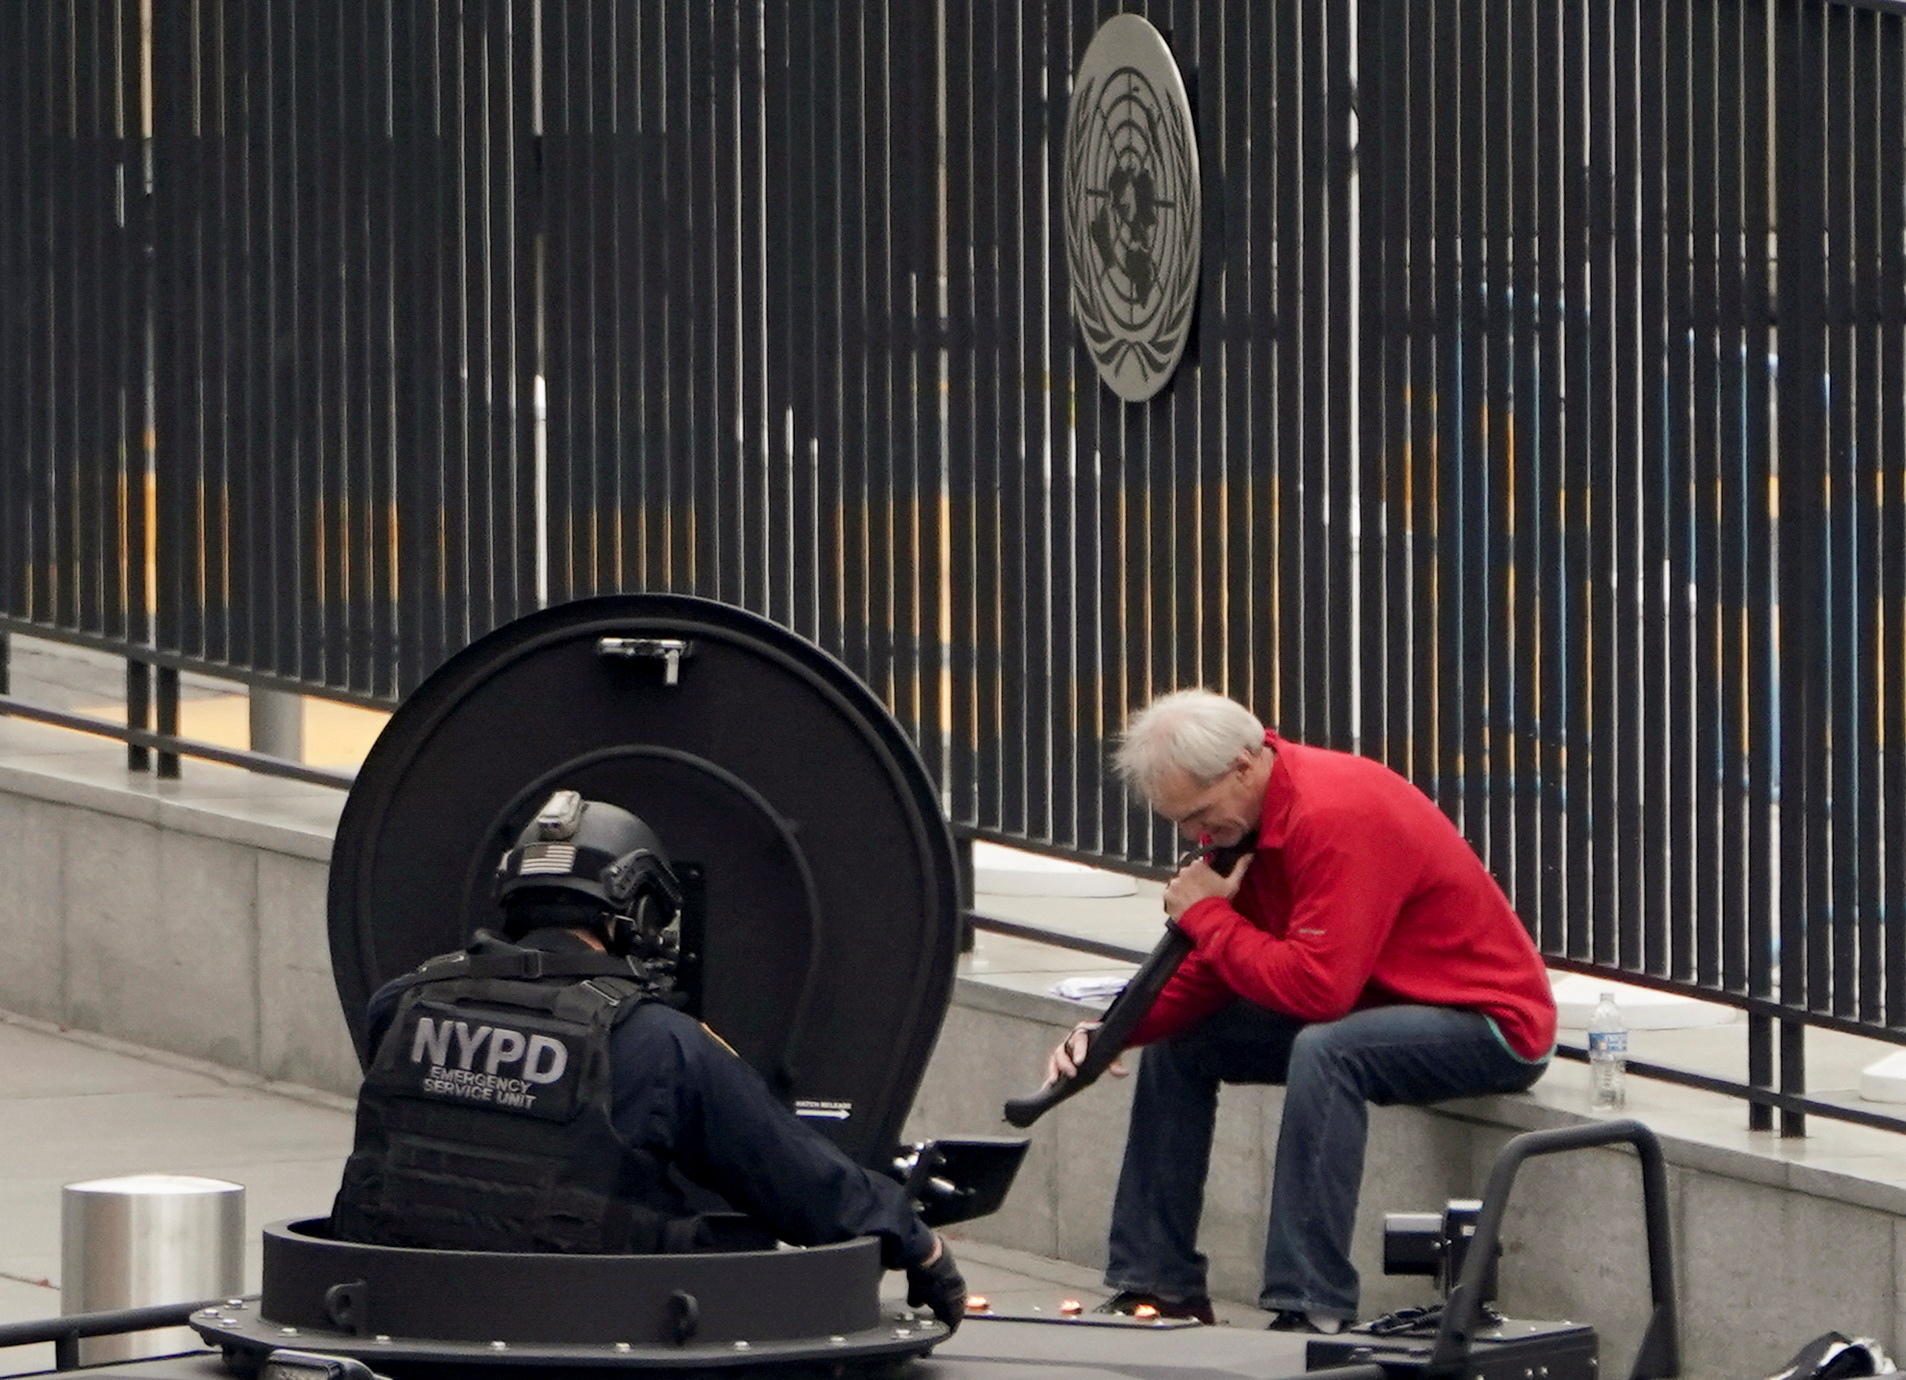 An armed man speaks with member of the NYPD outside the United Nations Headquarters in New York City